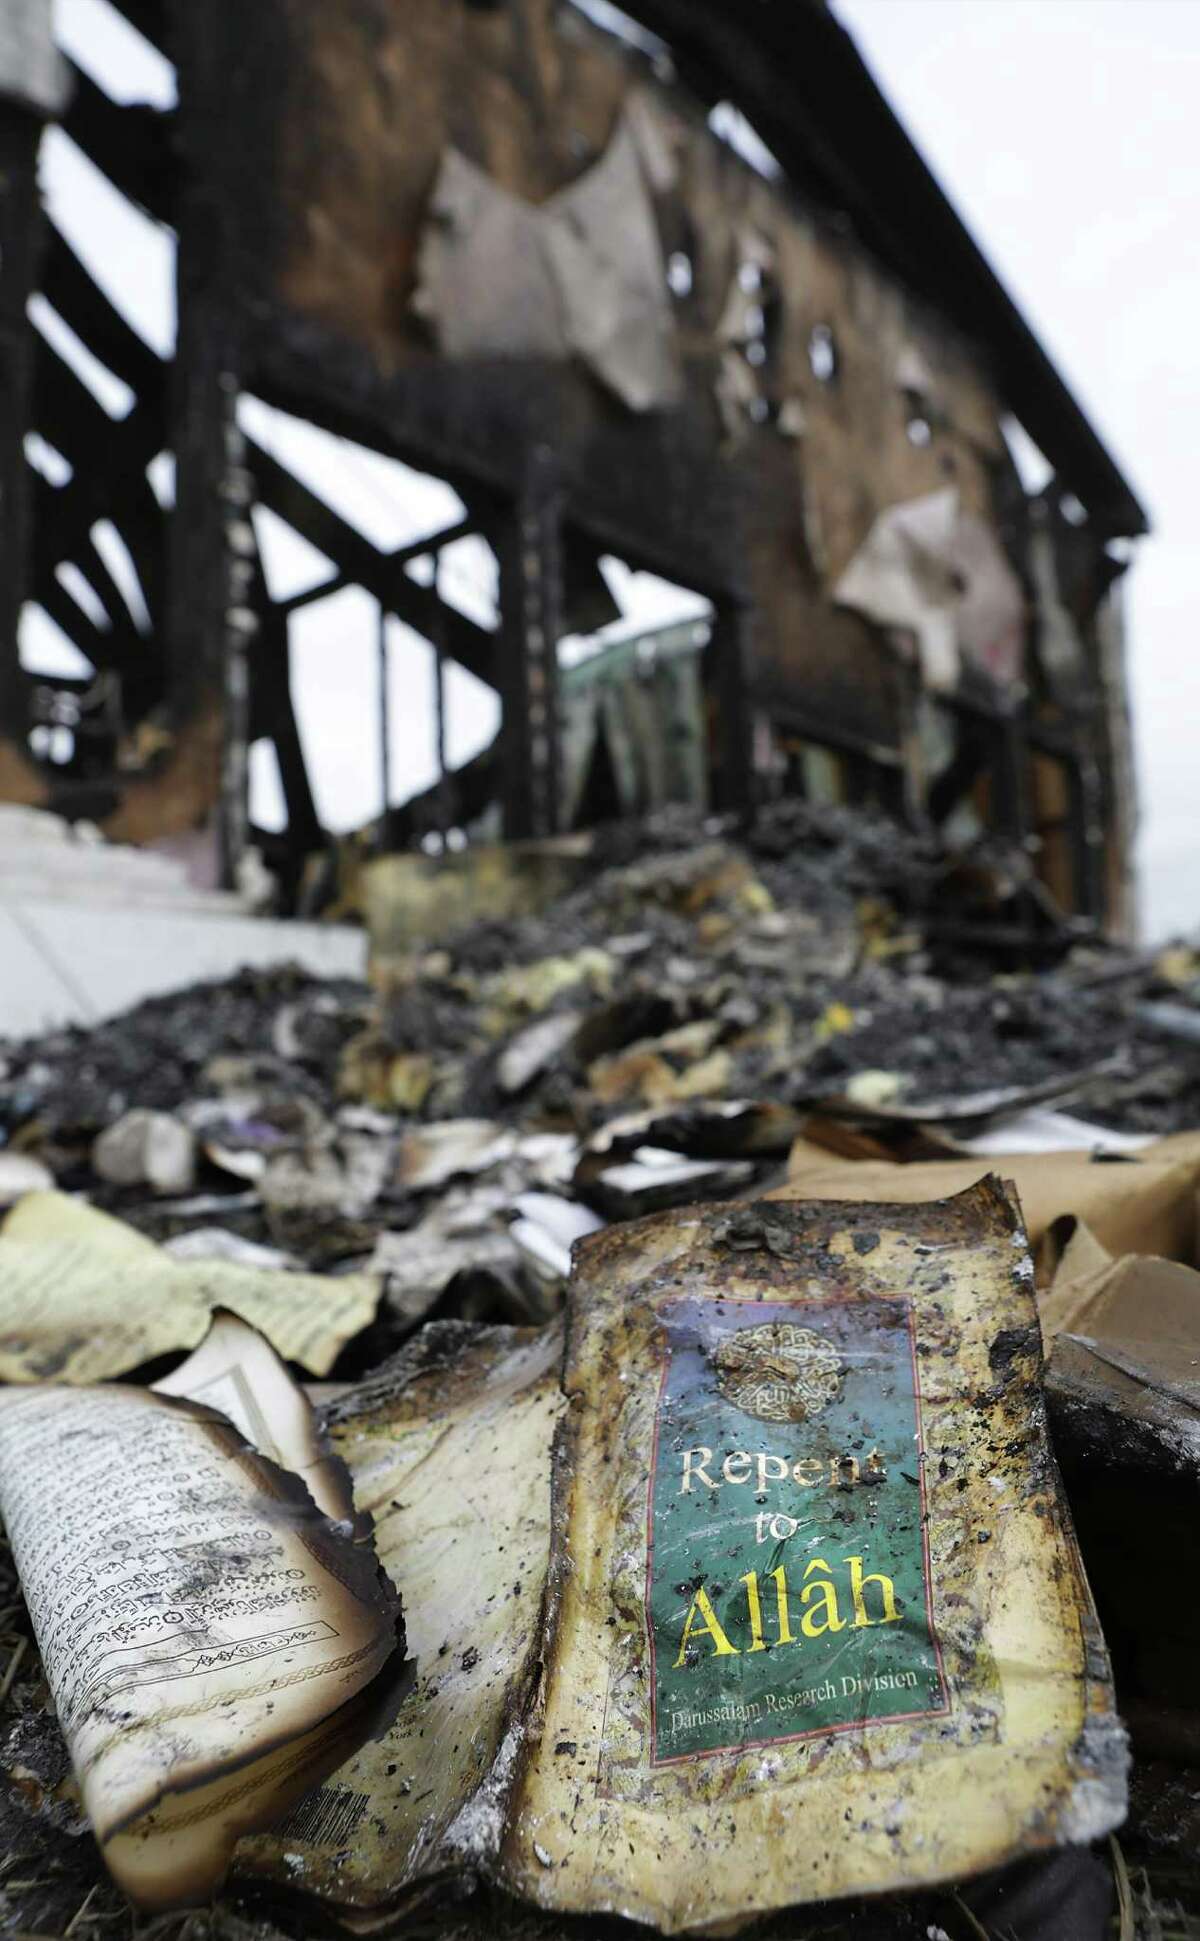 A burned Islamic study book is now debris outside the total loss of the Victoria Islamic Center, in Victoria, Texas on Tuesday, Feb. 2, 2017.